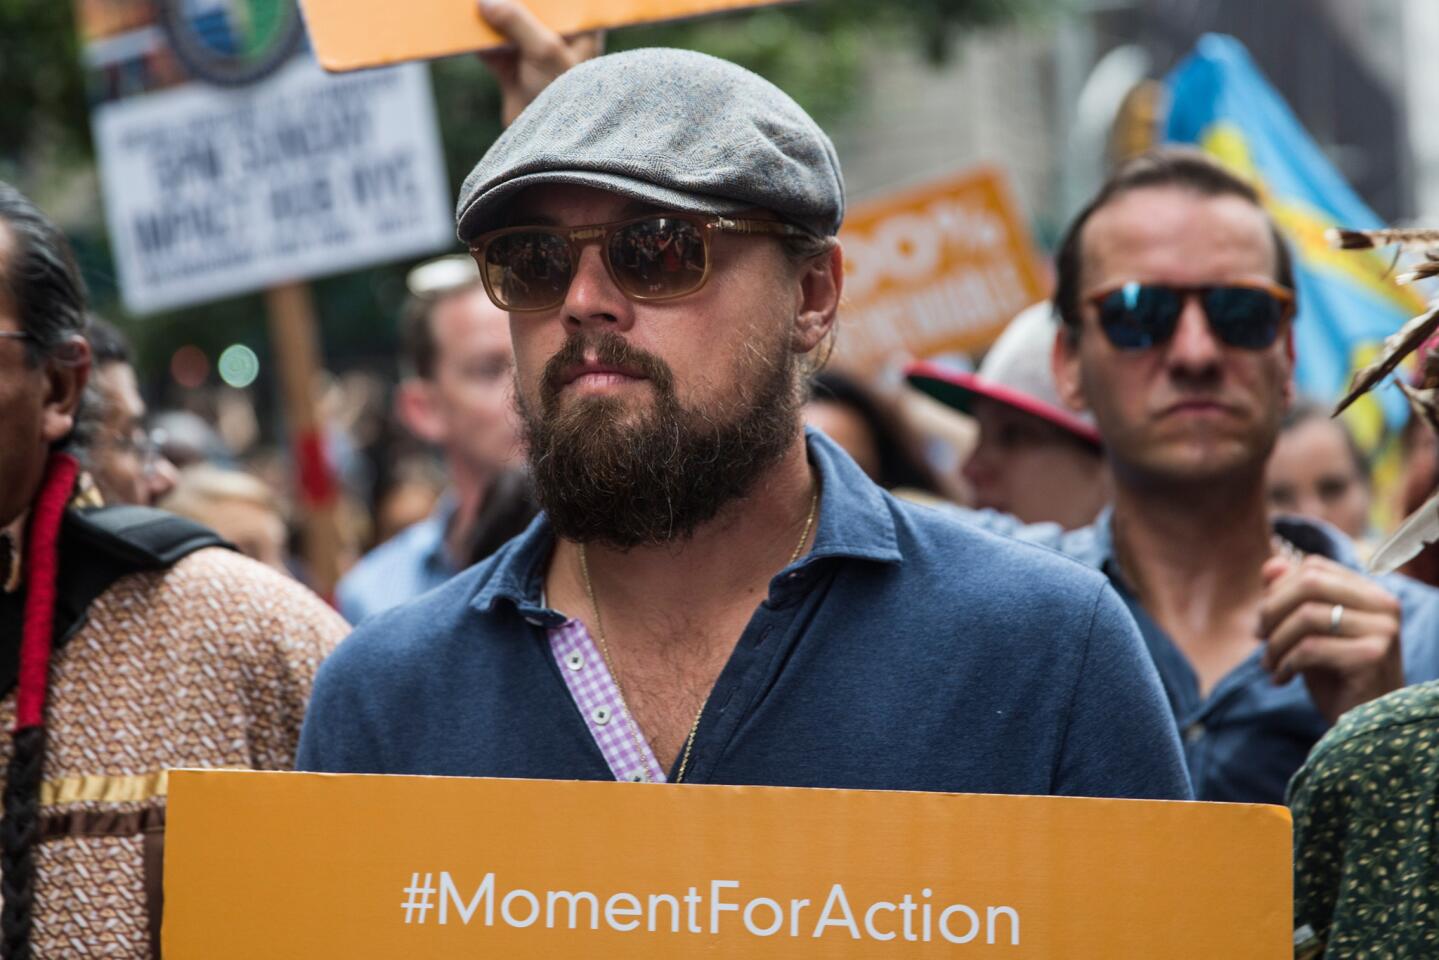 Leonardo DiCaprio at the People's Climate March